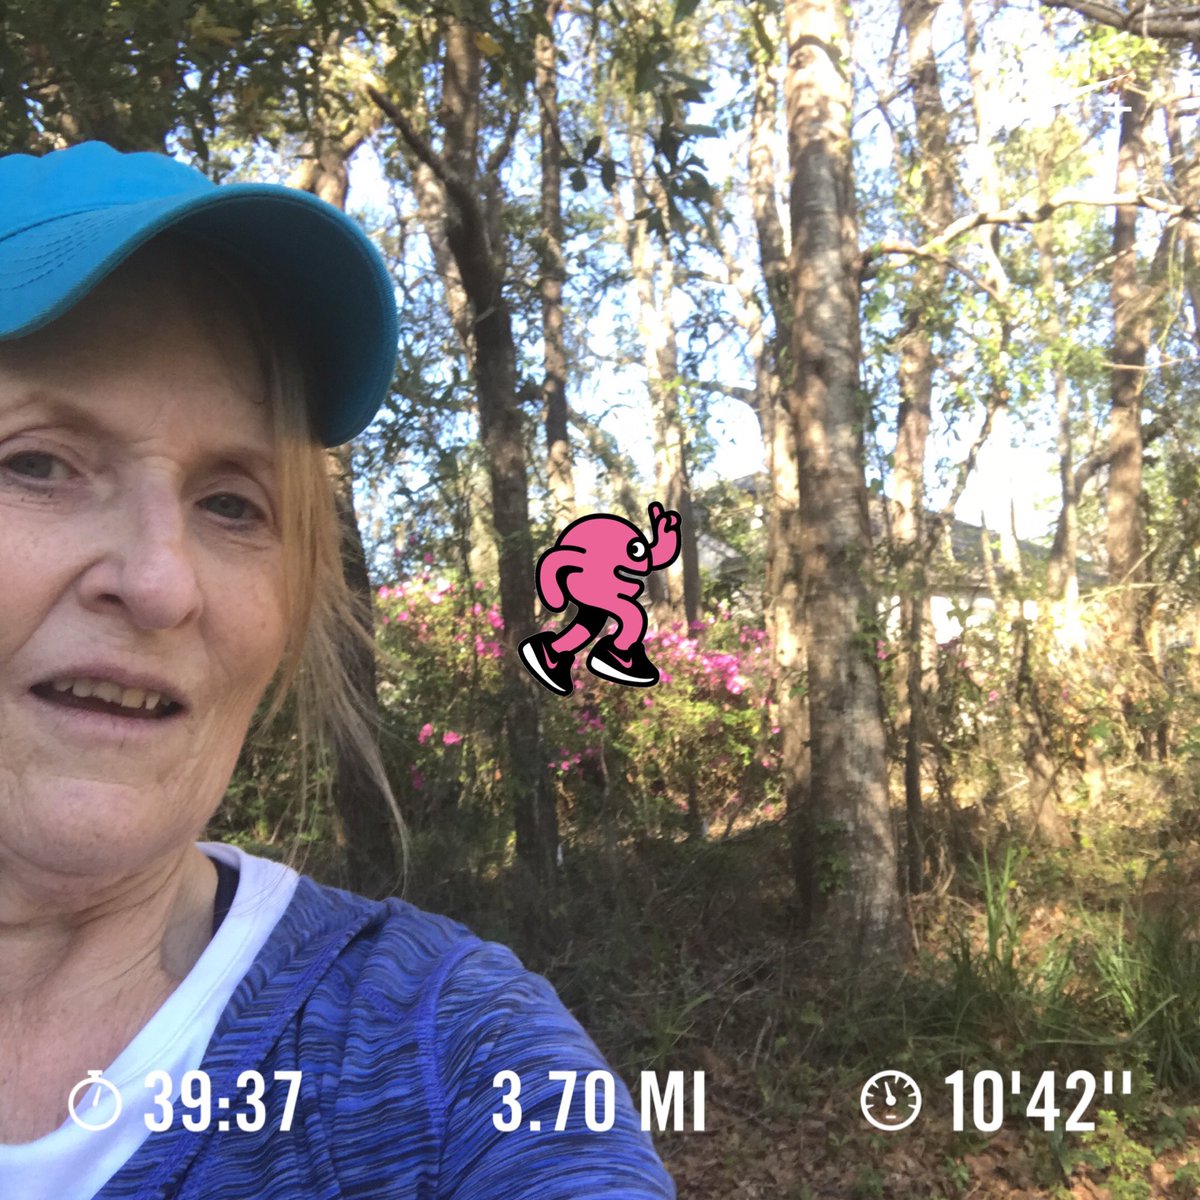 Another beautiful day to run in
North Florida 💥🏃‍♀️
Did #MPC M2W1D1 this morning 
Loving everything about it💪🏻👊🏻‼️(mostly..)😉❤️
⁦@MyPeakChallenge⁩ ⁦@SamHeughan⁩ 
⁦@ana_cfmonteiro⁩ ⁦@isabelleBenoitm⁩ ⁦@MagicFeast⁩
#MPC2019
#PeakerForLife